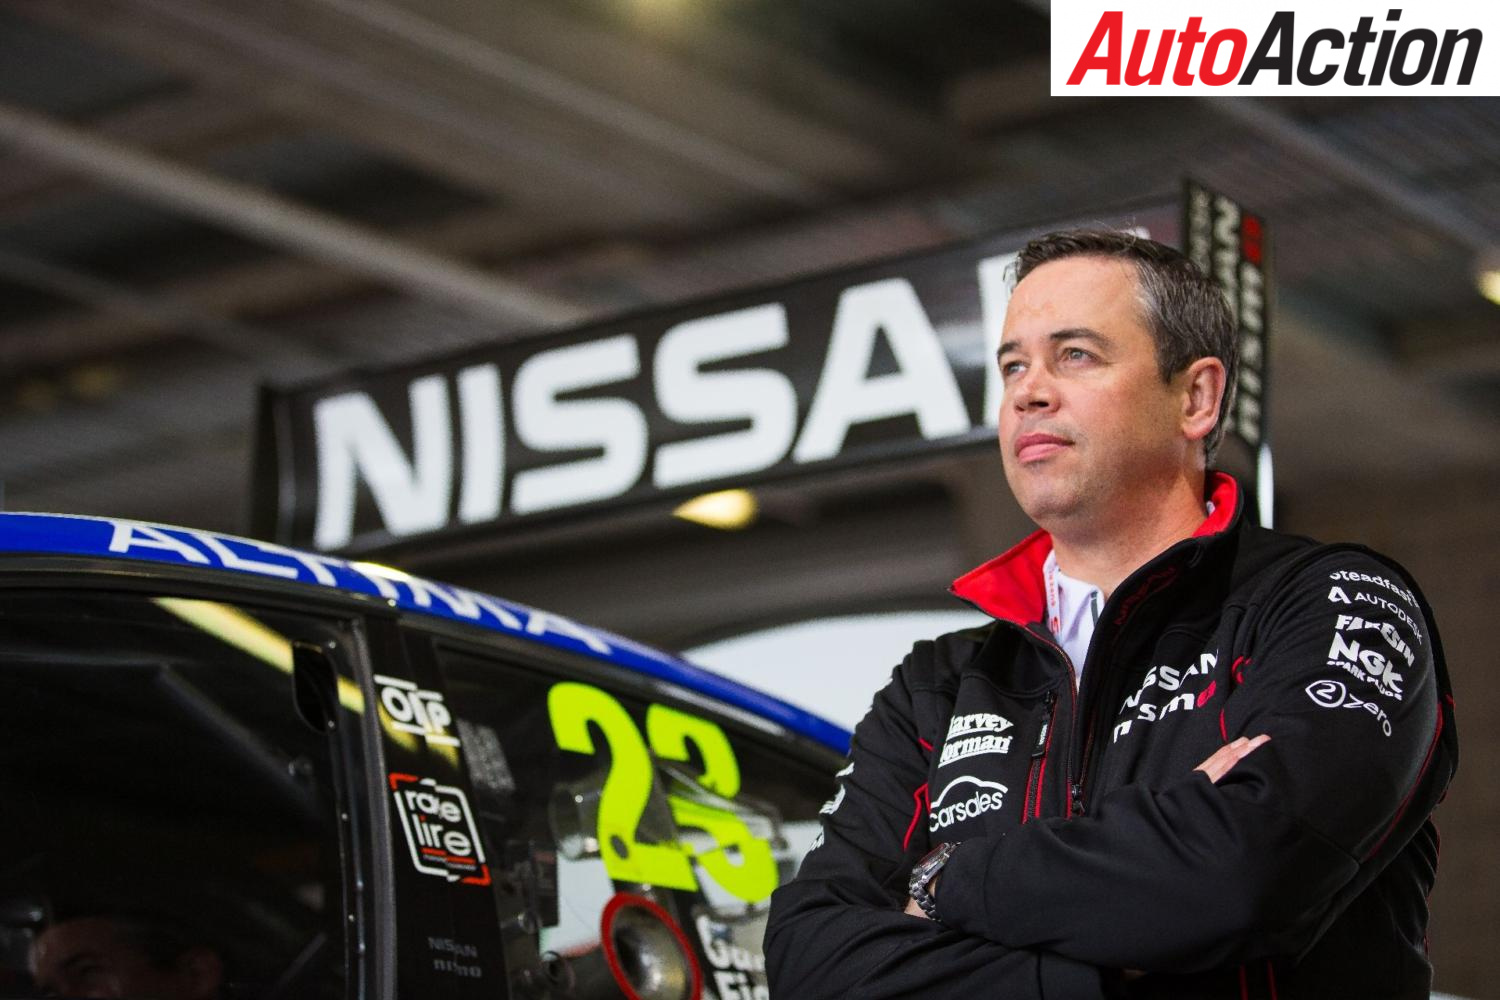 Nissan’s new MD Stephen Lester will have a big say in Nissan’s motorsport activities in Australia.